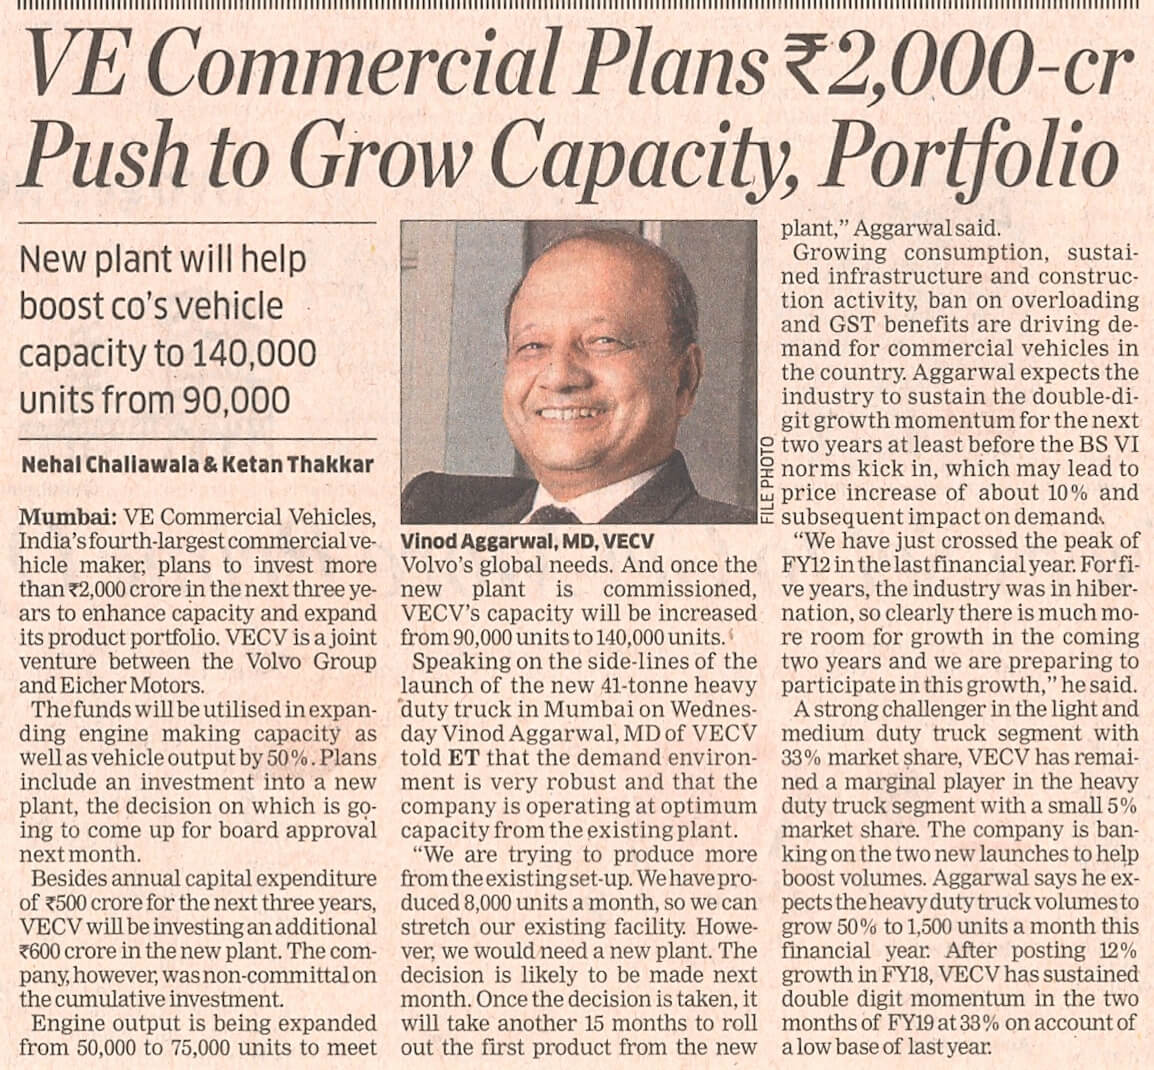 VE Commercial plans Rs. 2,000 cr push to grow capacity, portfolio